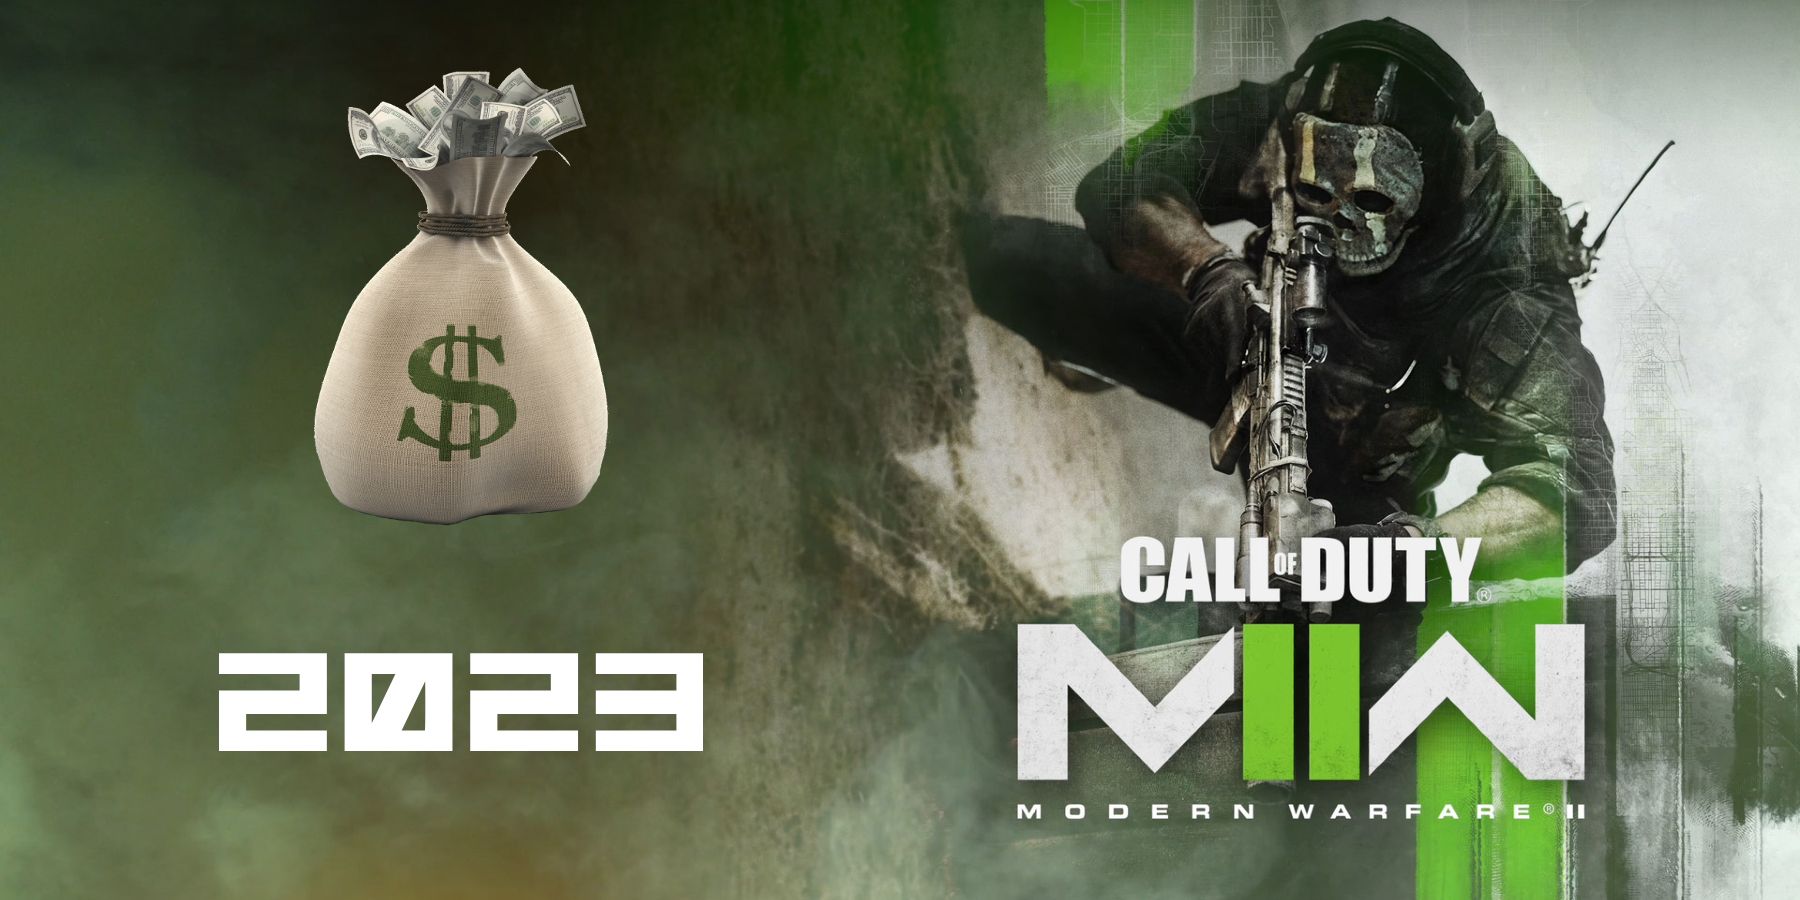 Call of Duty (COD) Modern Warfare 2 Release Date, Trailer & more: When is  it coming out? - DigiStatement